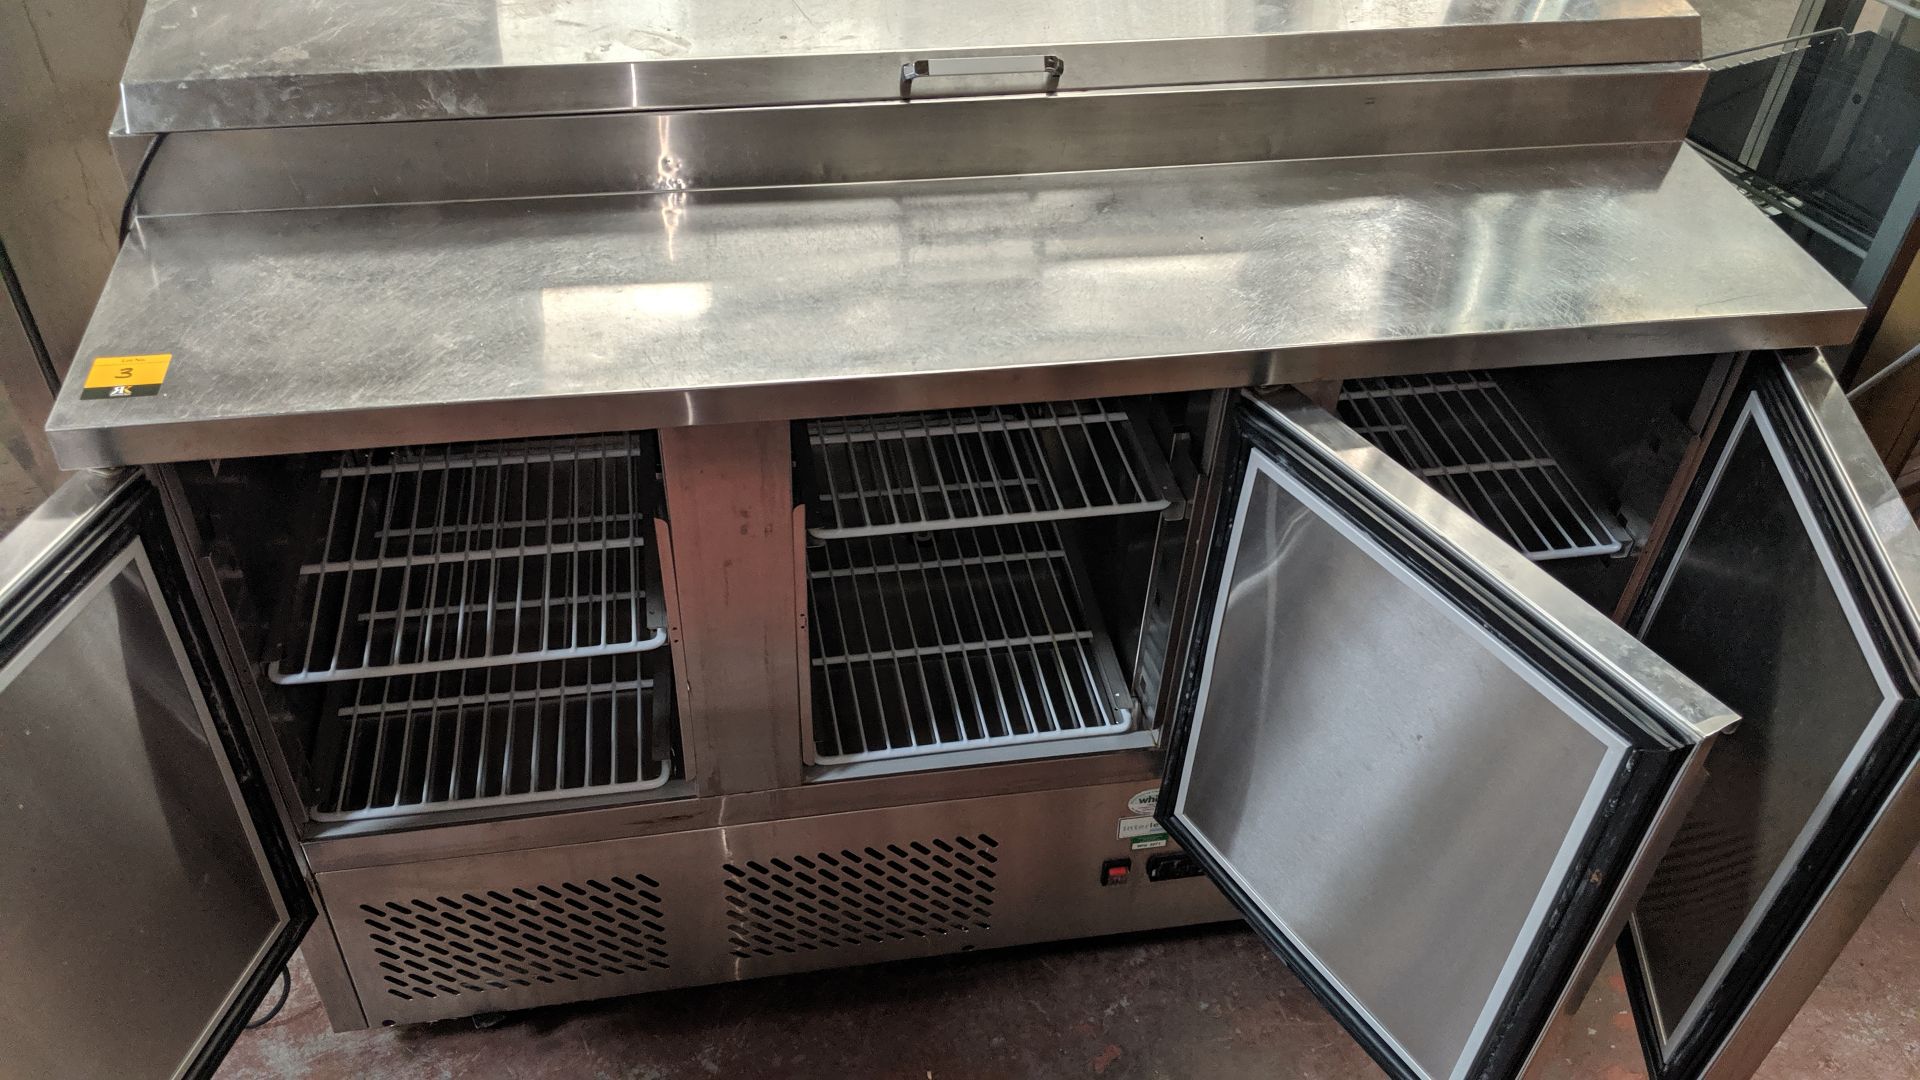 Interlevin stainless steel refrigerated triple door prep counter with hinged lid access salad - Image 3 of 7